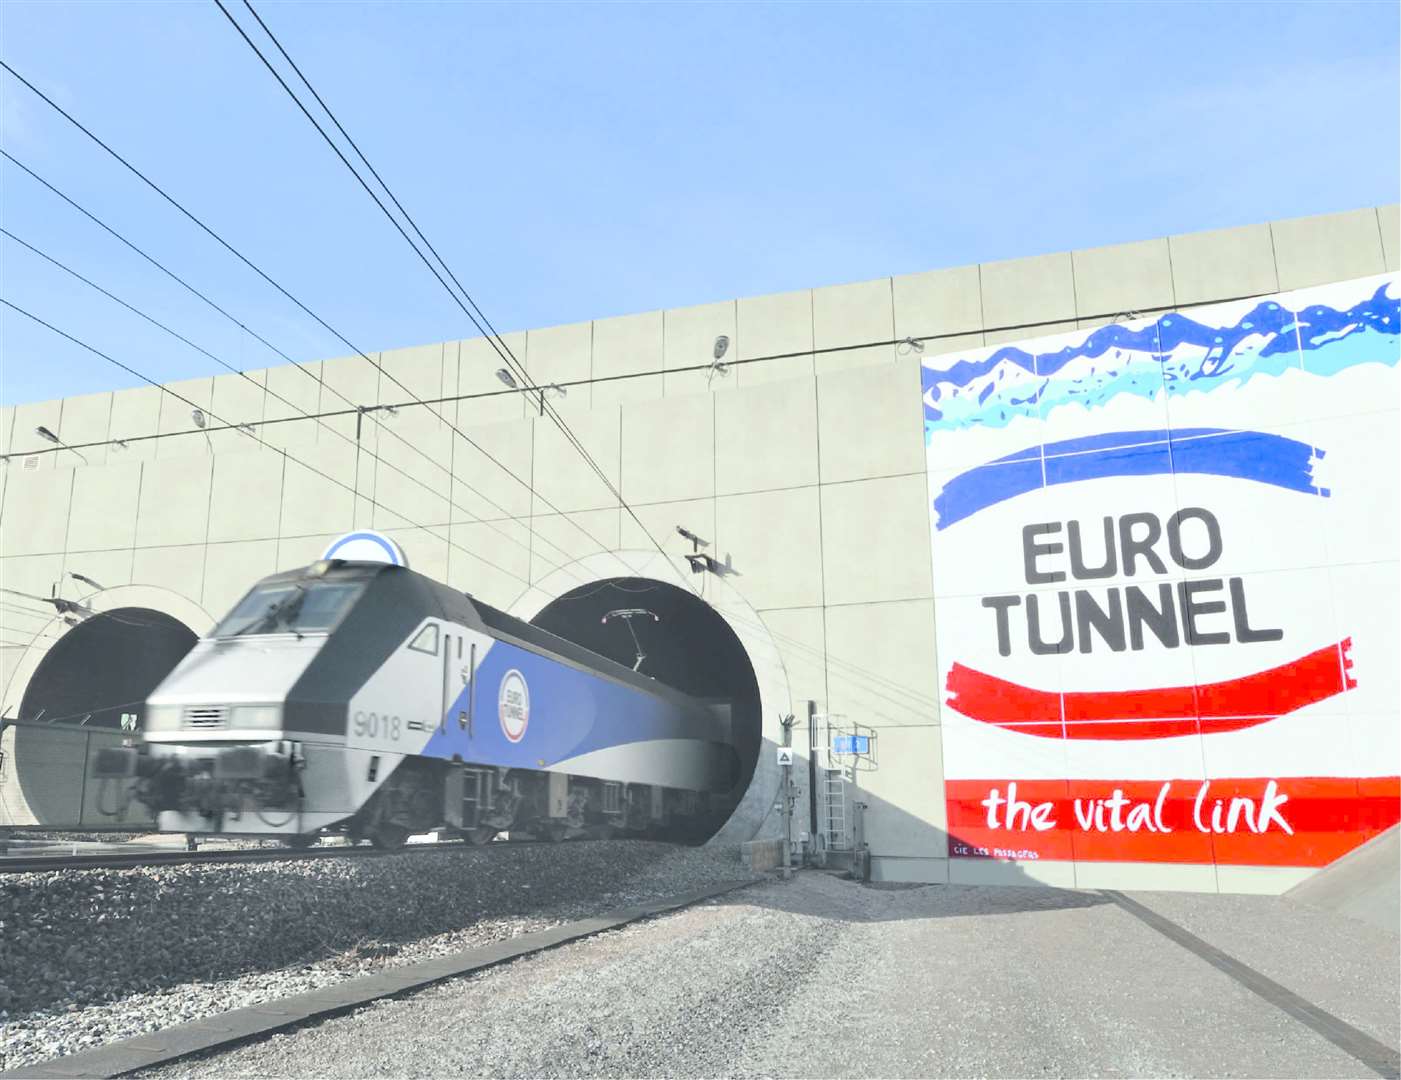 Getlink, the French firm that runs the Eurotunnel, says it working on a scheme to reduce the hours of its British employees